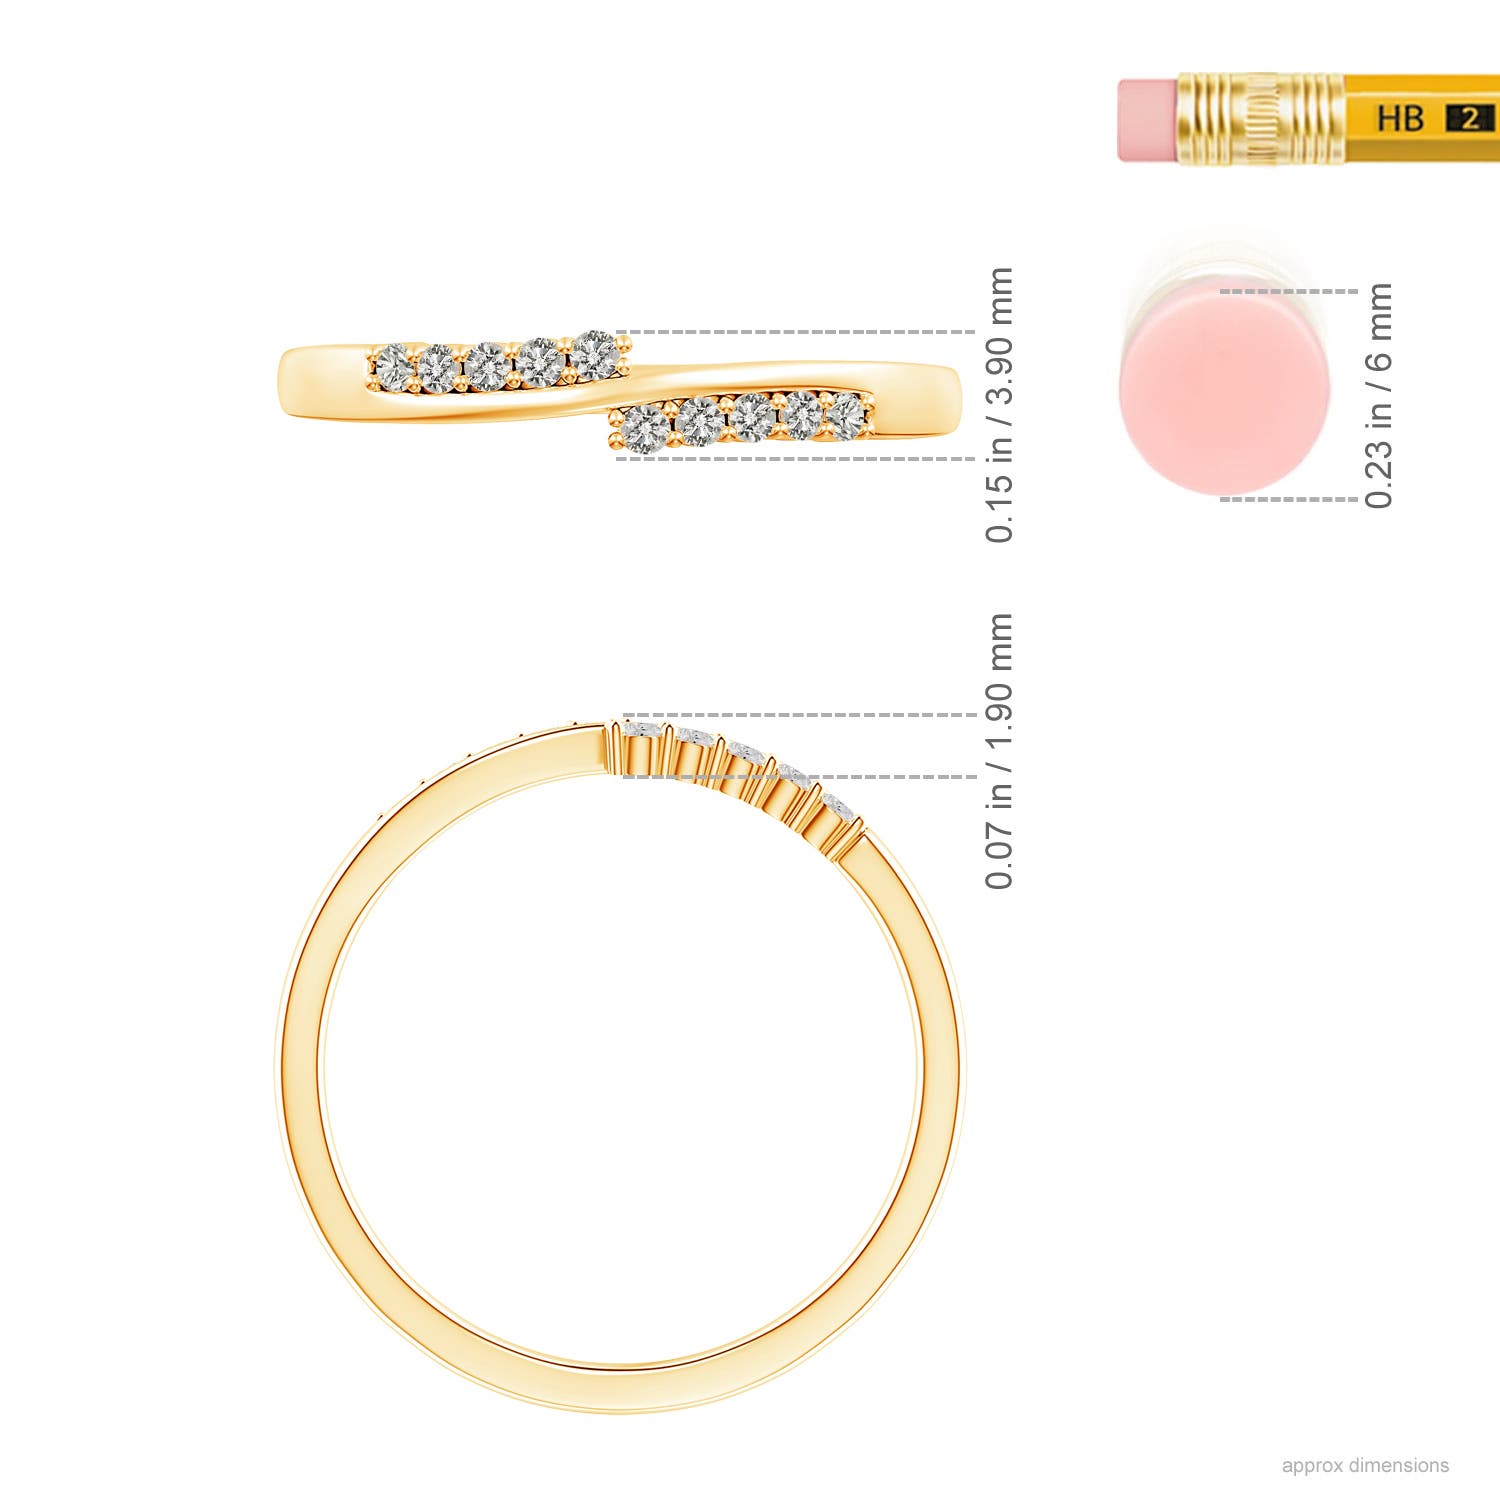 K, I3 / 0.12 CT / 14 KT Yellow Gold